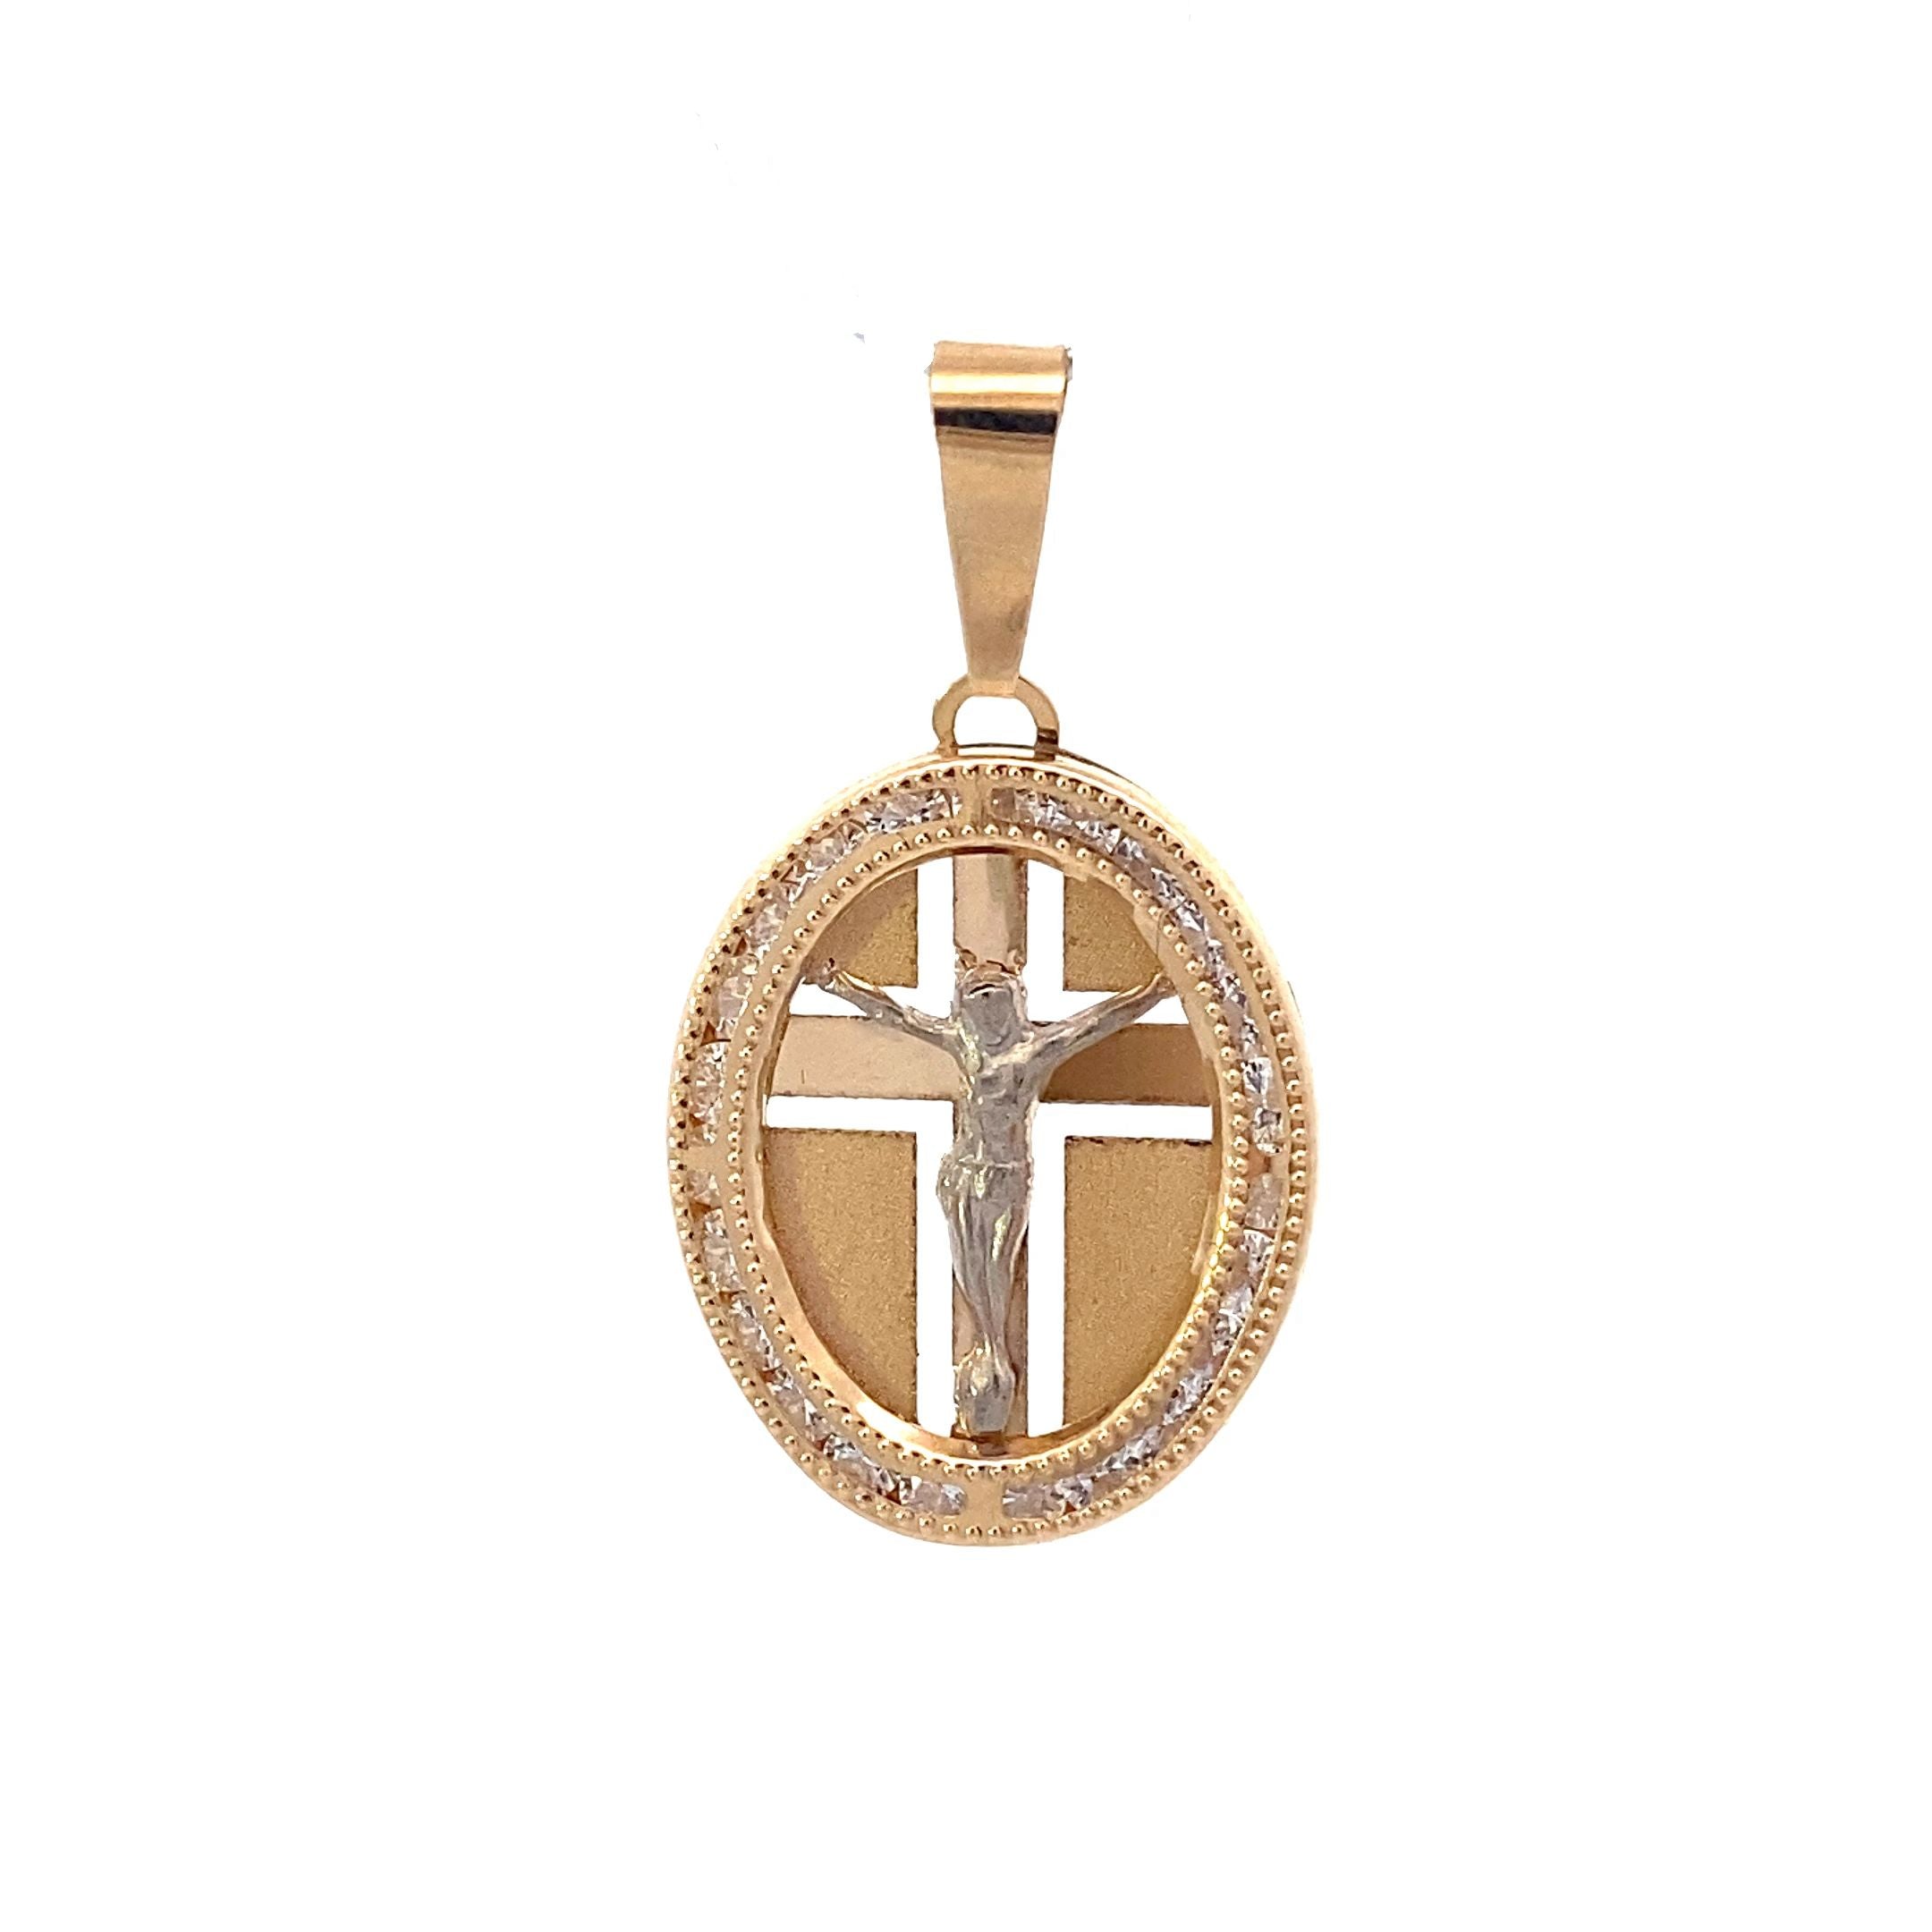 New 14K Yellow Gold Oval Cross Cut Out Pendant